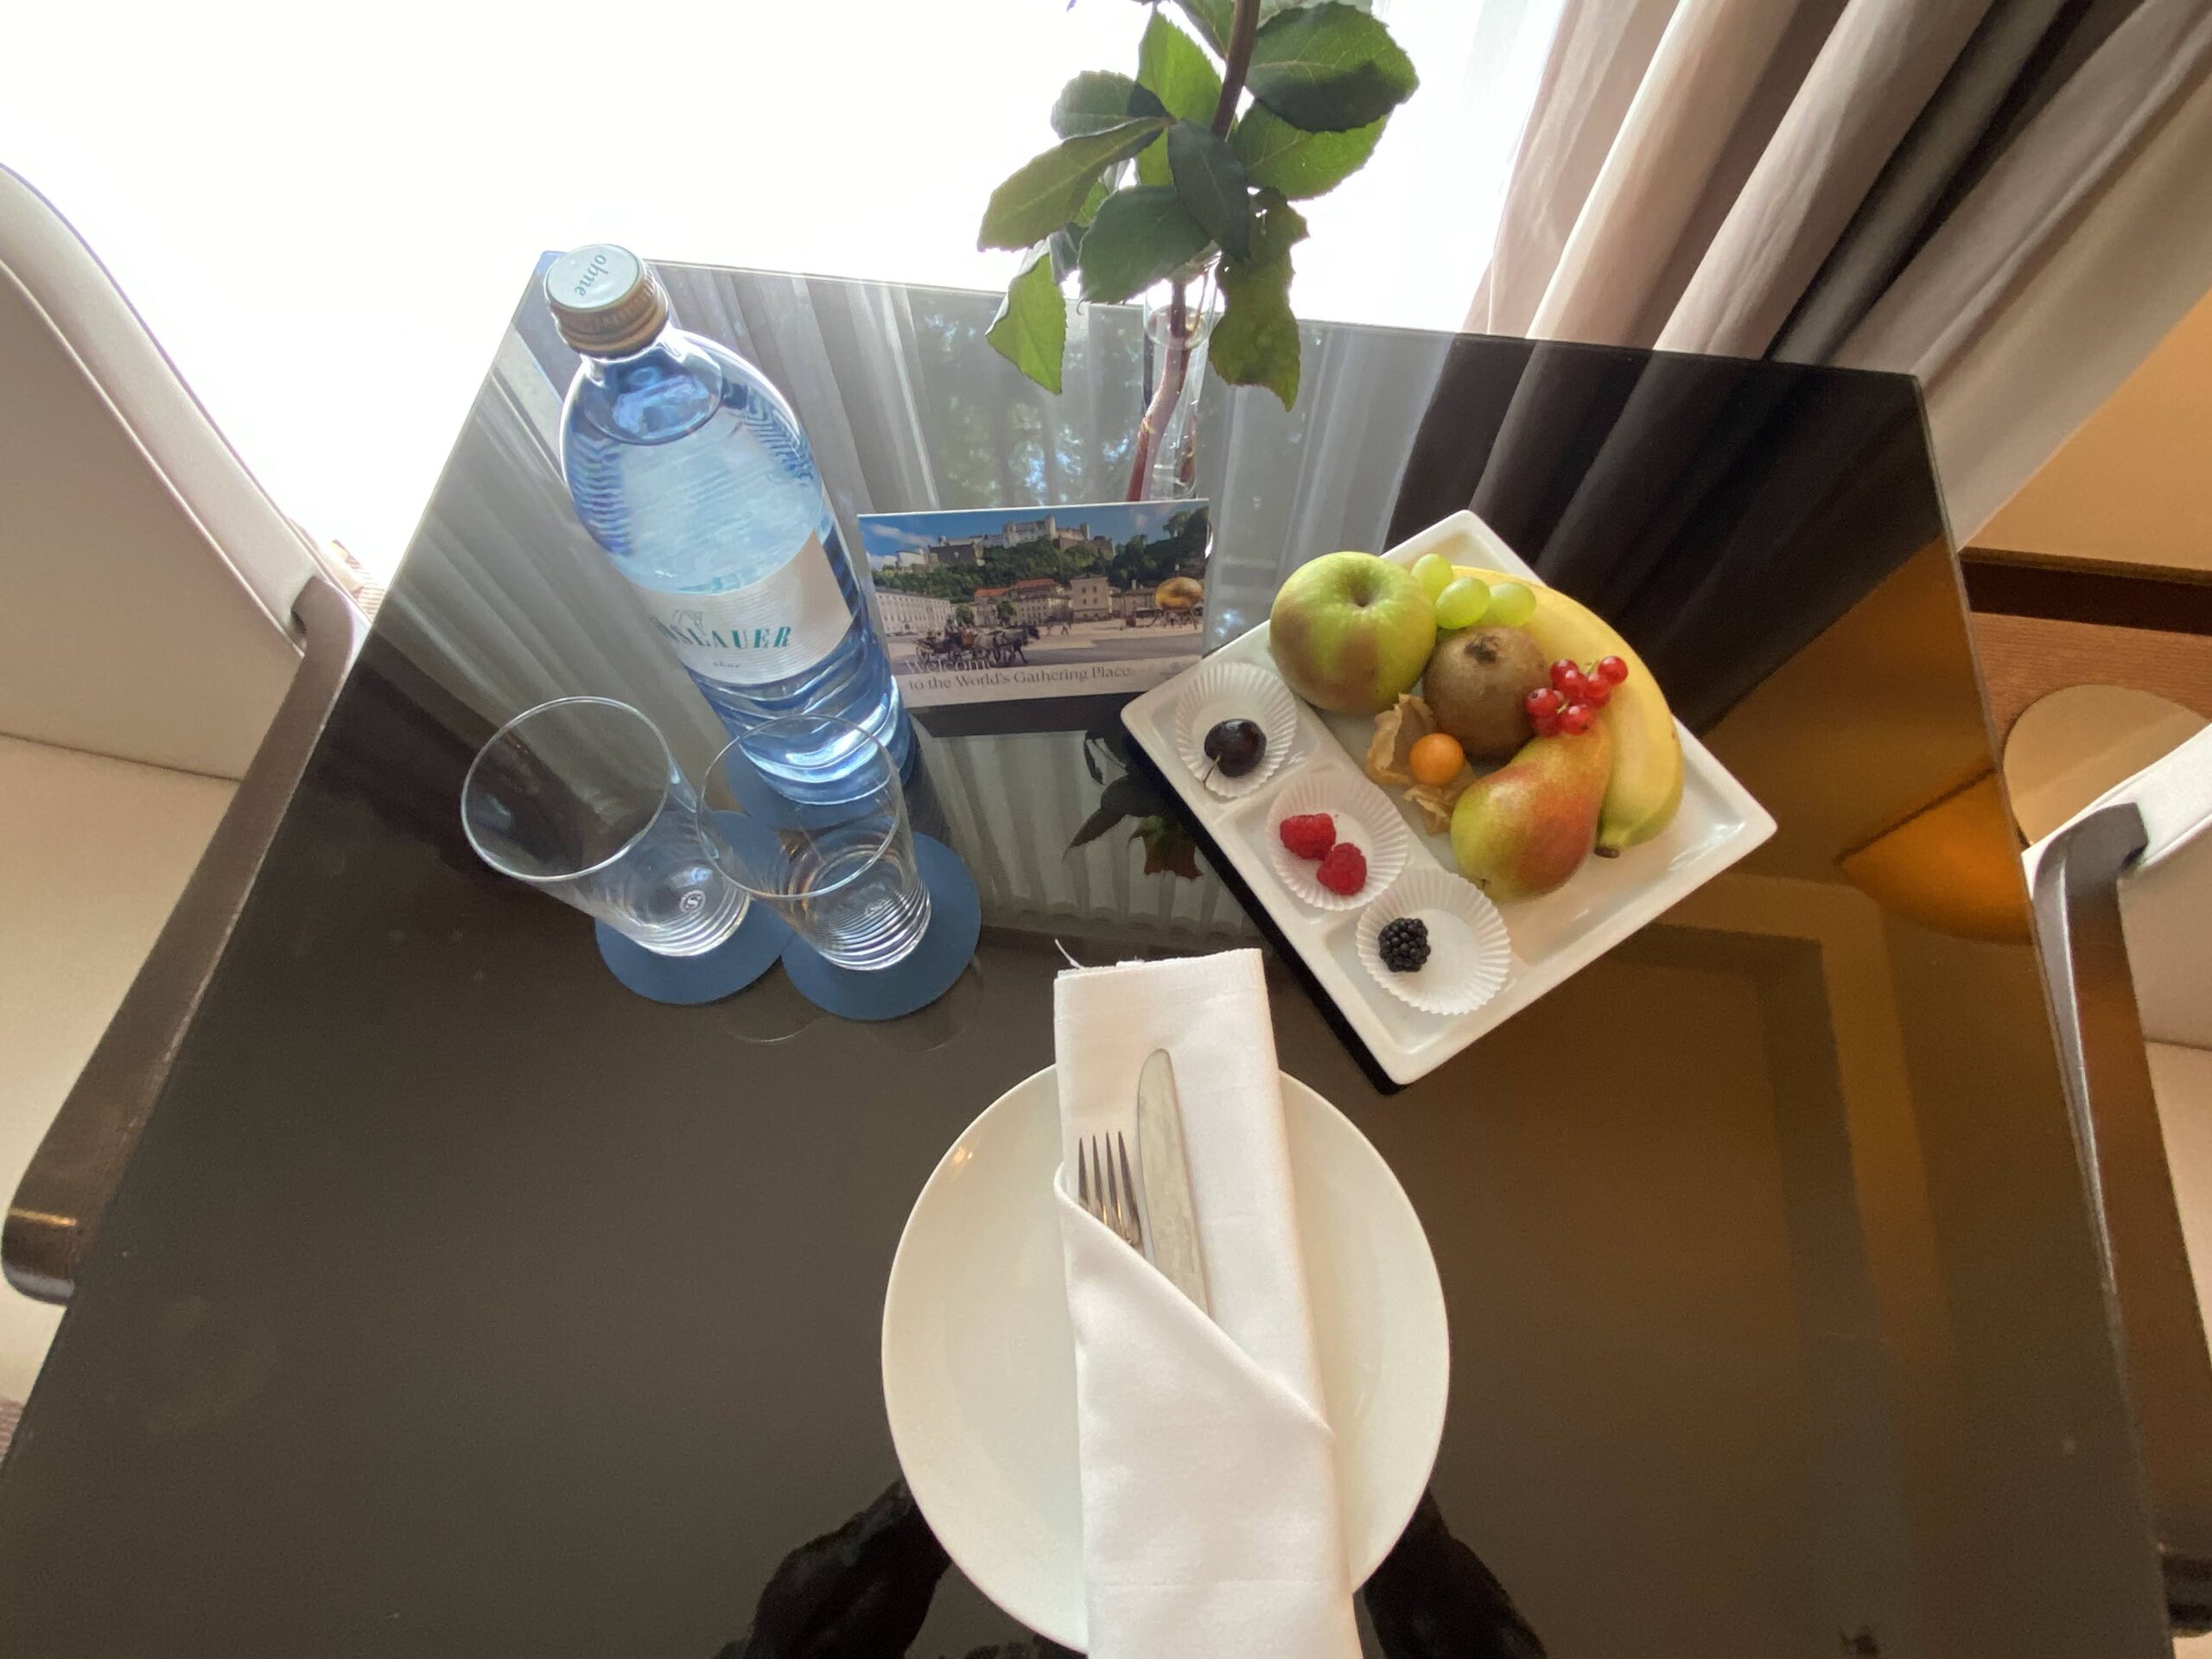 a plate of fruit and a bottle of water on a table